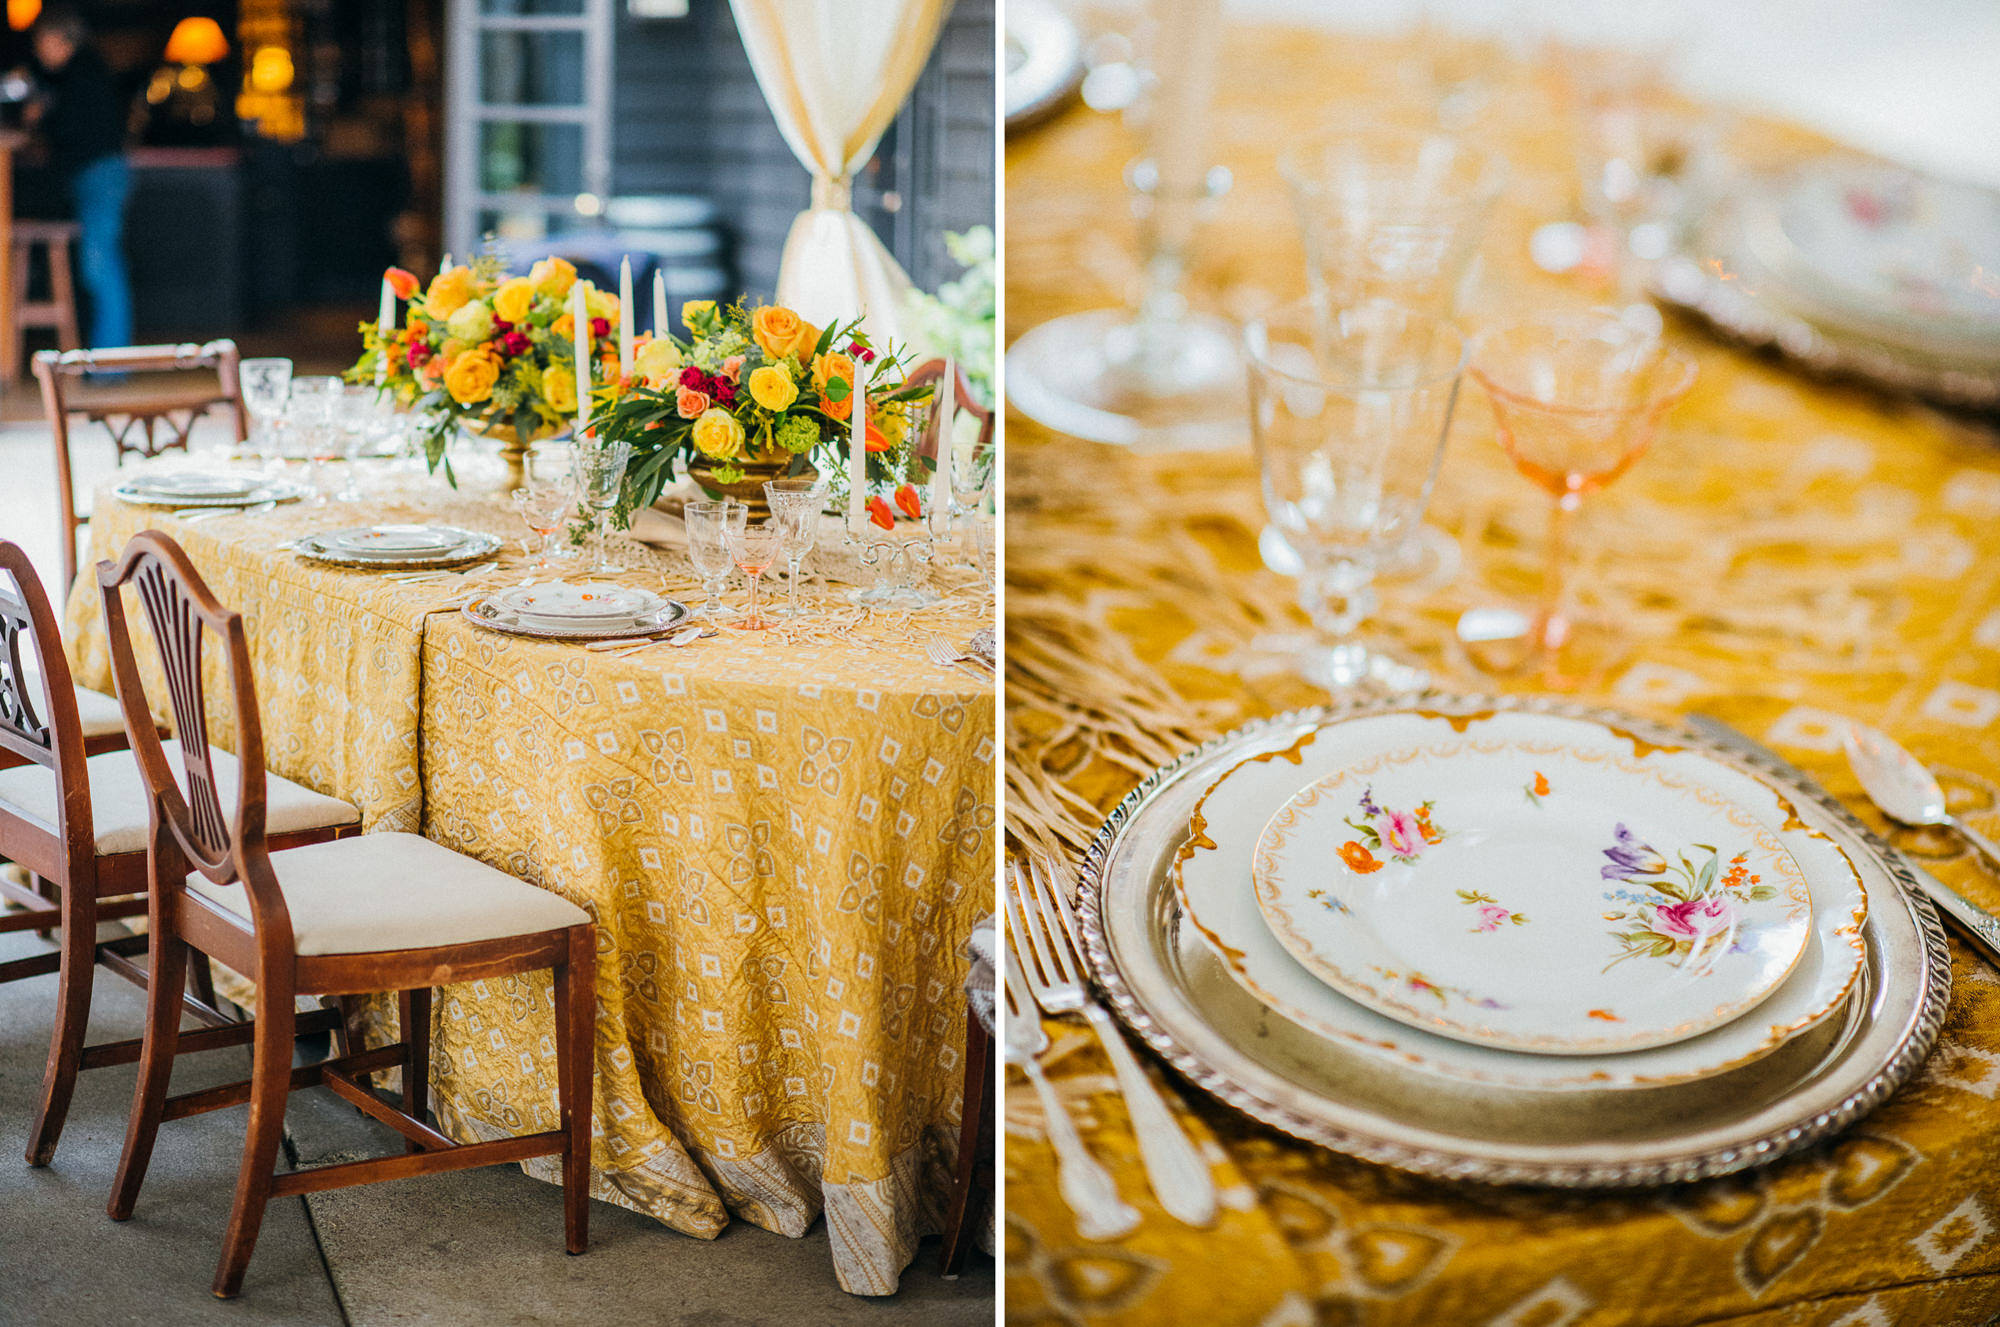 Seattle Wedding Photographers document a French Bohemian themed wedding at JM Cellars for Weddings in Woodinville (65)